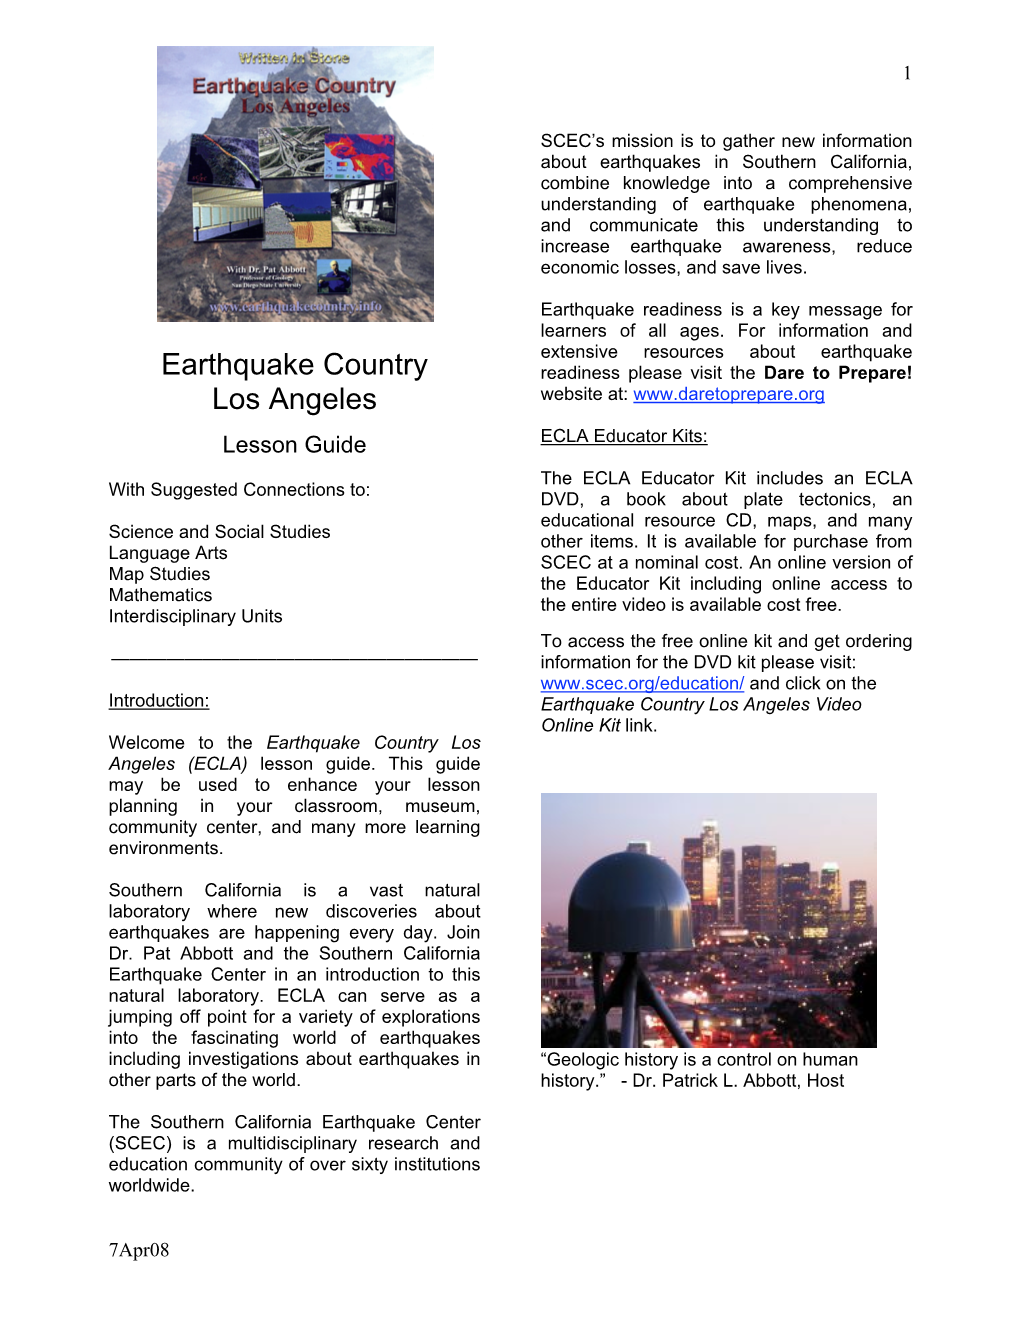 Earthquake Country Los Angeles Video Online Kit Link